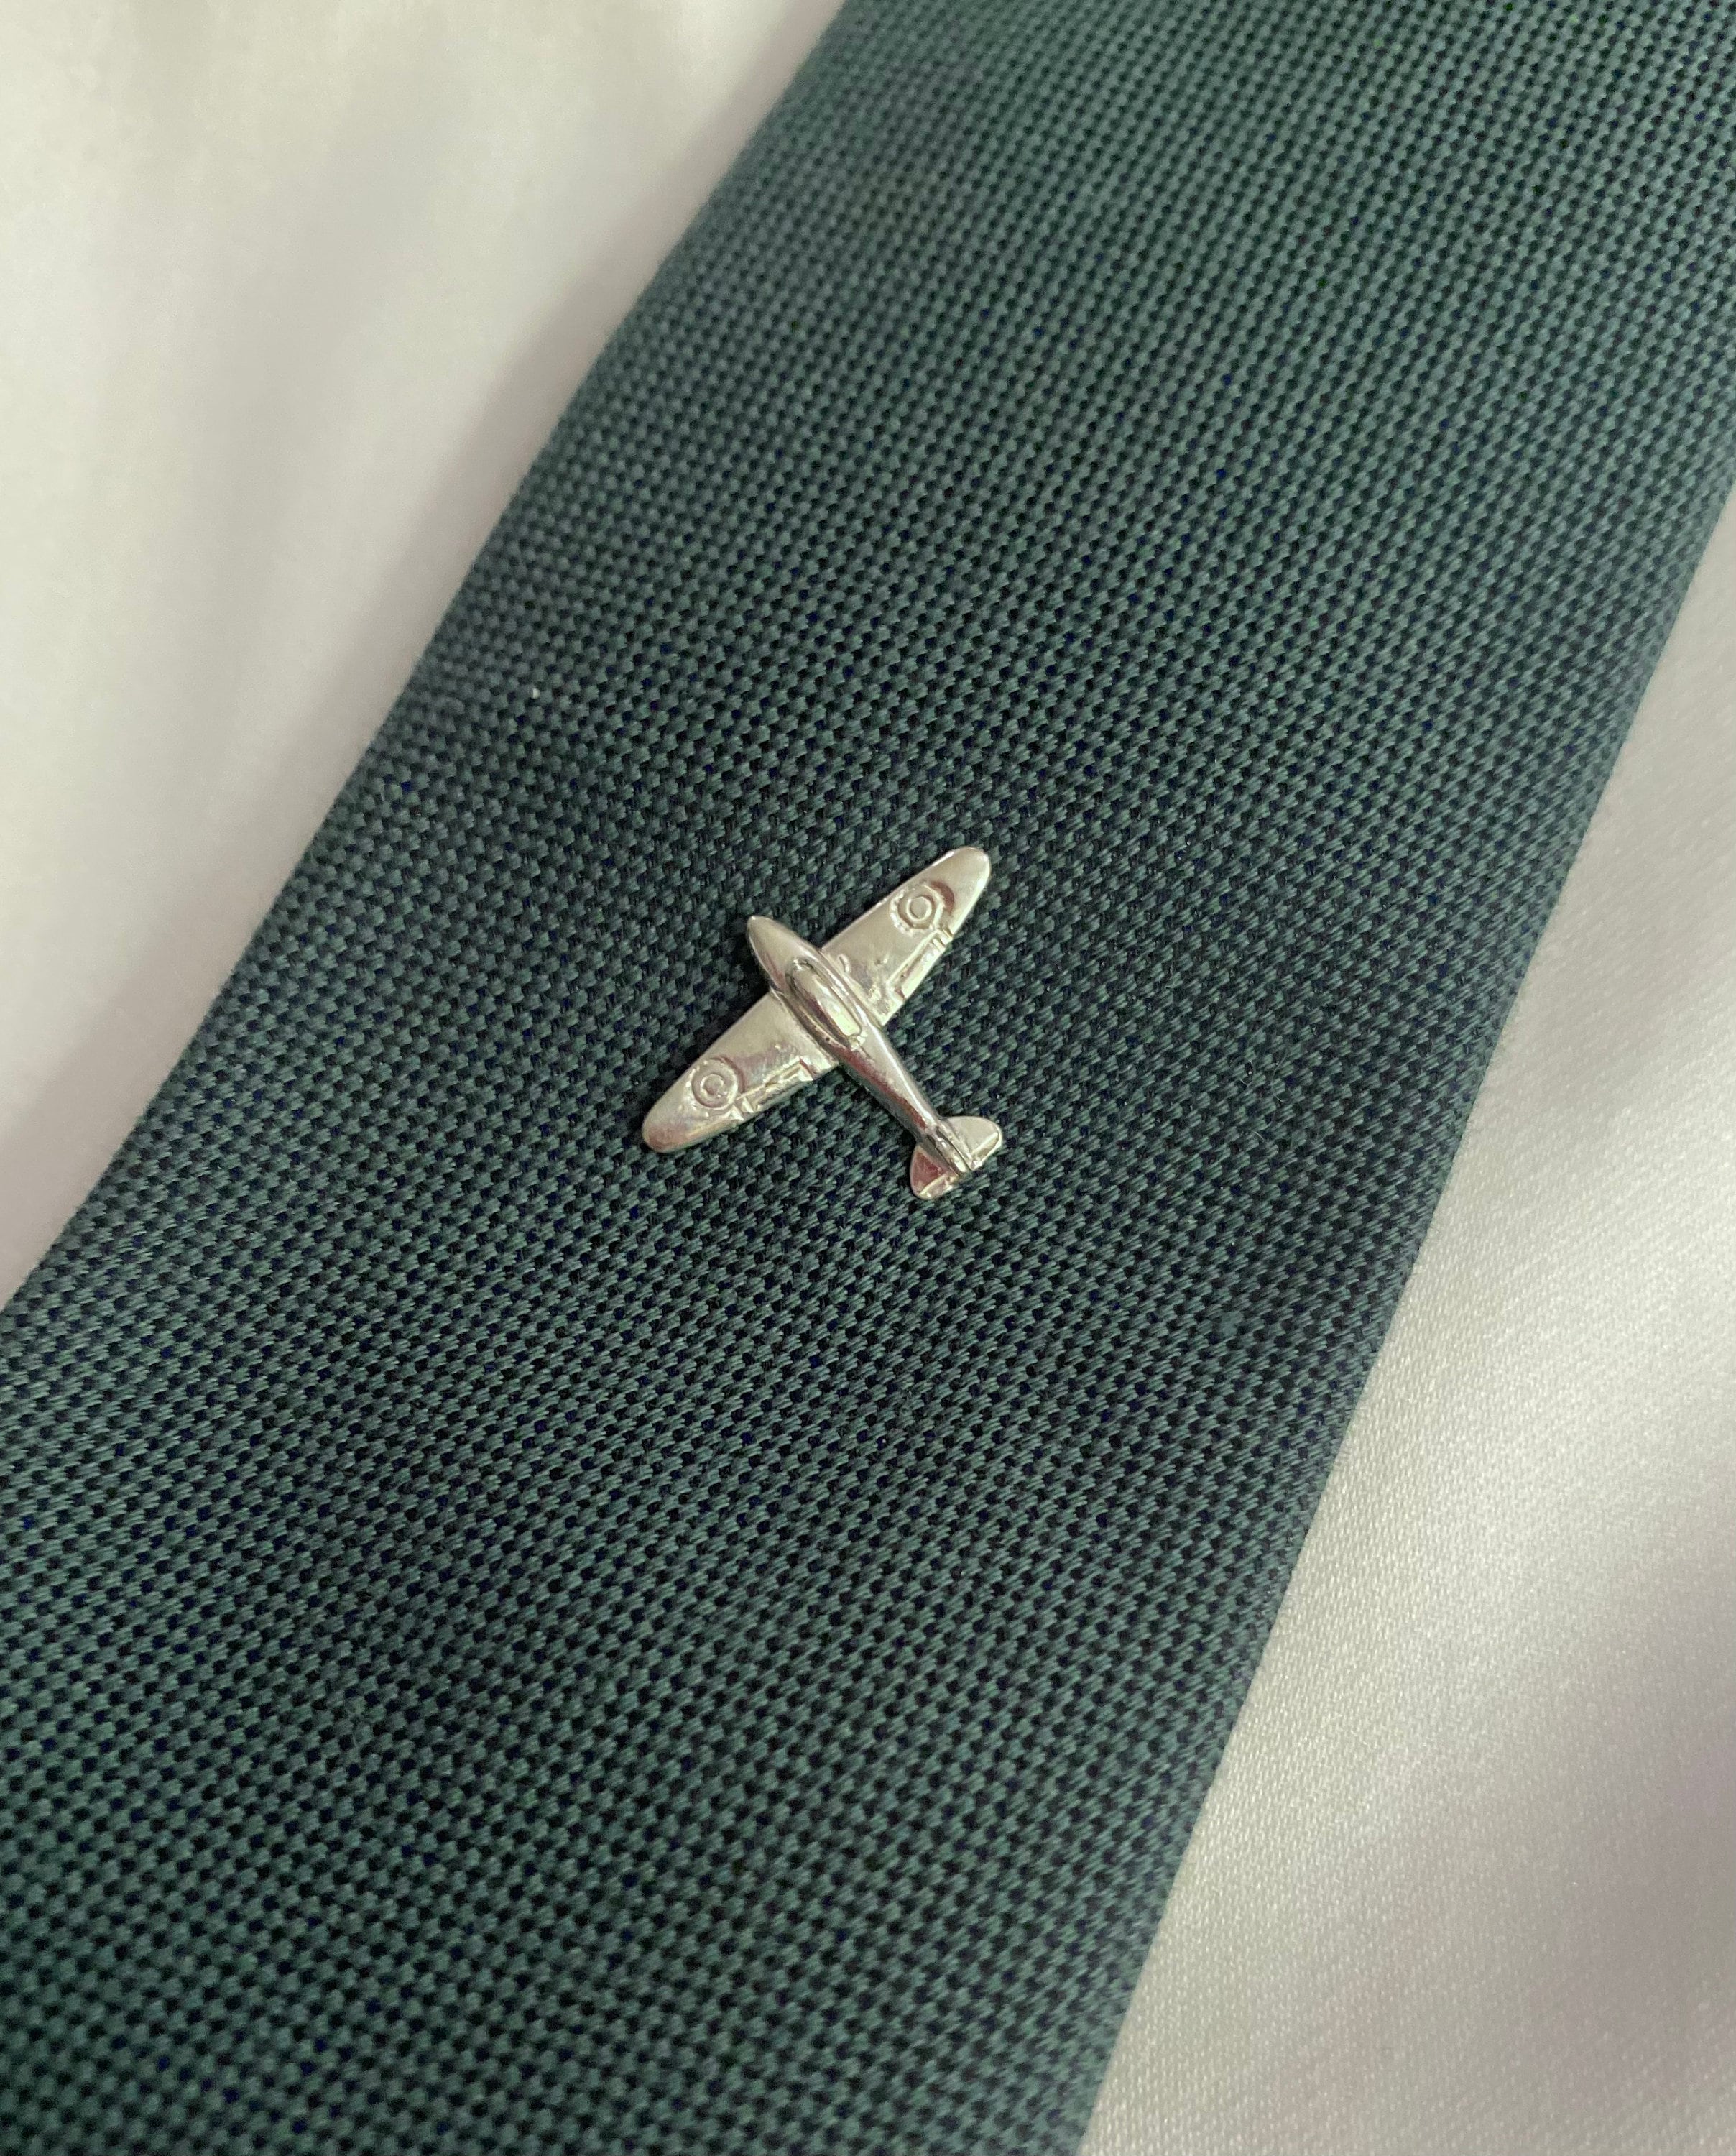 Spitfire Tie Pin for Men, Made with Original Spitfire Fuselage